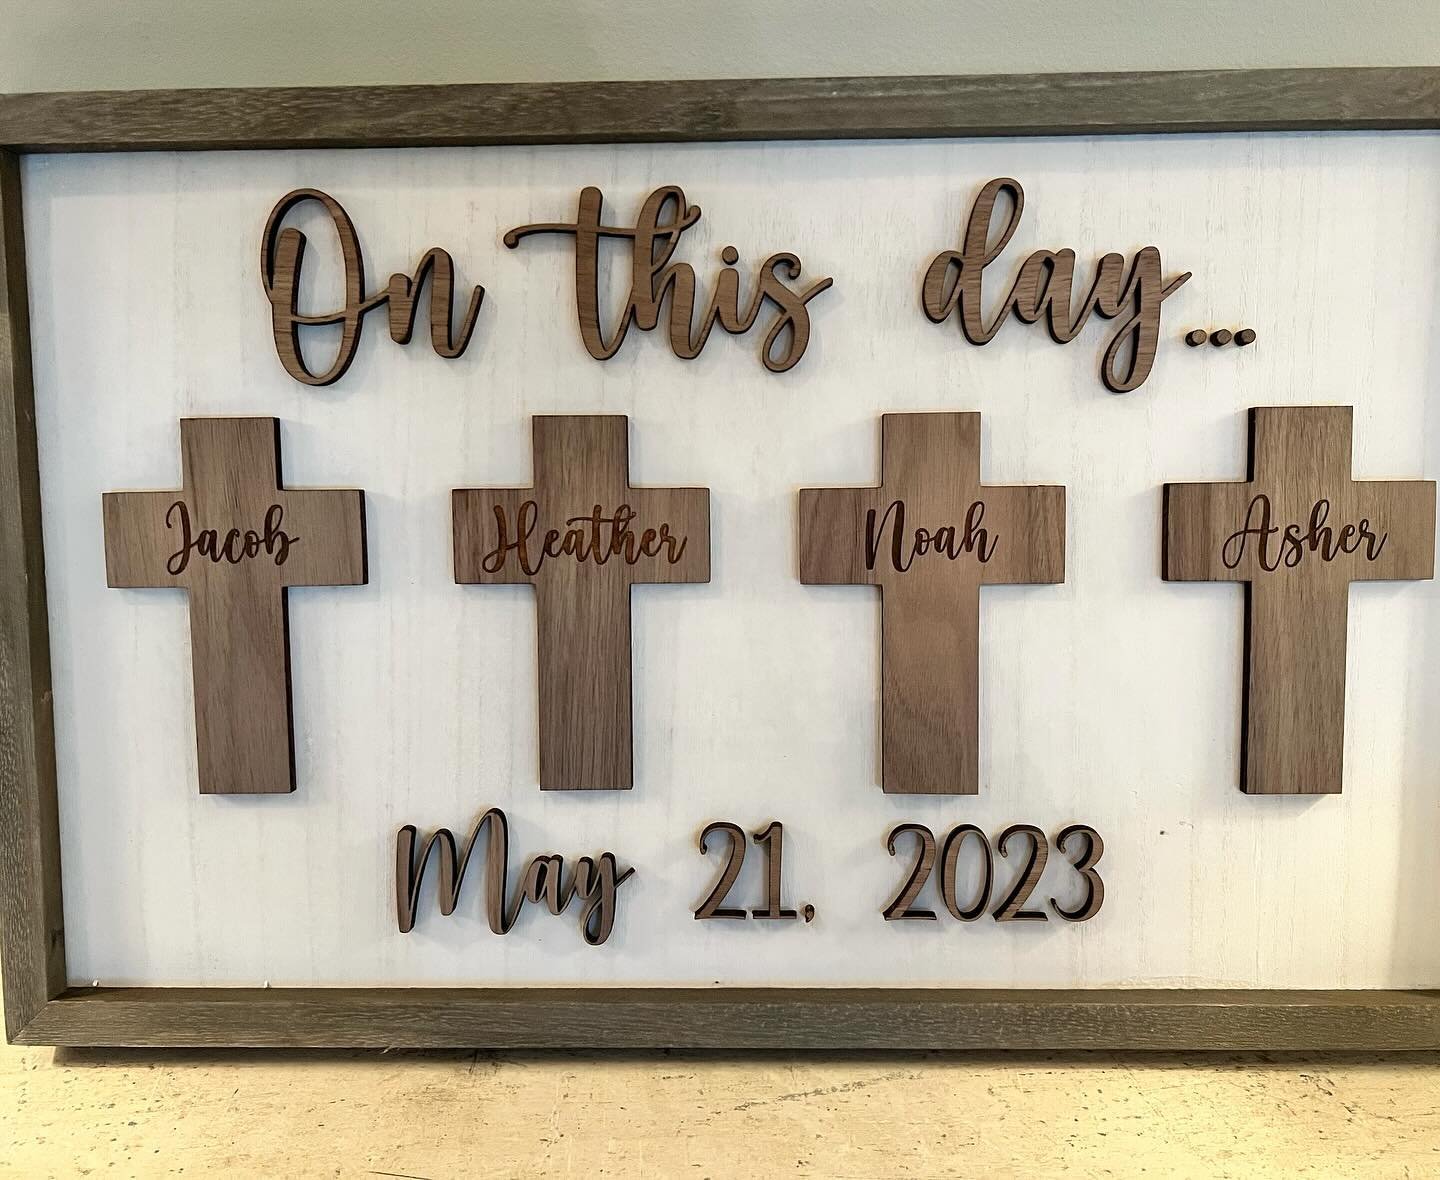 Have a baptism, communion or confirmation coming up?  These are sweet reminders of the special day. Wall hangings for decor or ornaments to capture the memory of the day, are both perfect gifts.